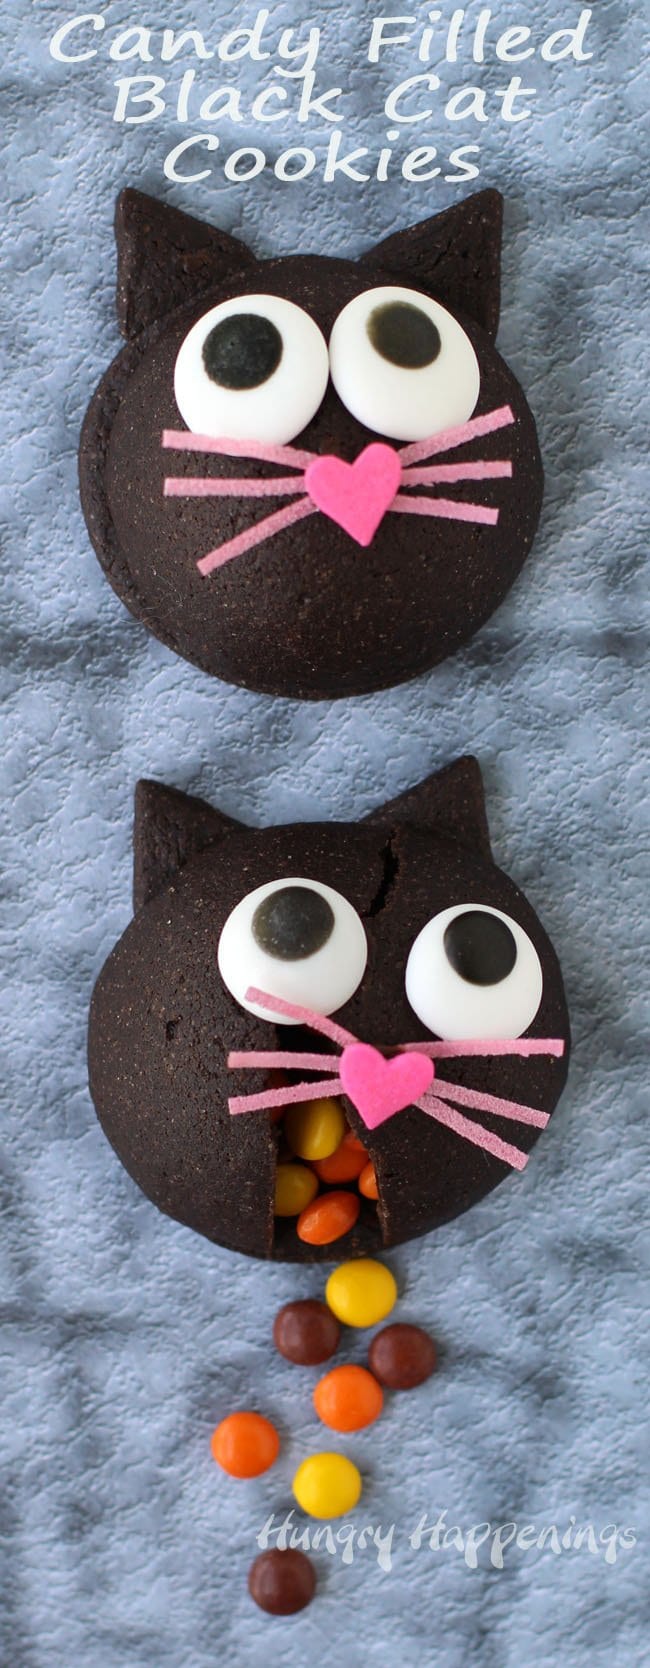 These wickedly cute Candy filled Black Cat Cookies make a purr-fect Halloween treat. See how you can make them at home. You'll find the tutorial at HungryHappenings.com.